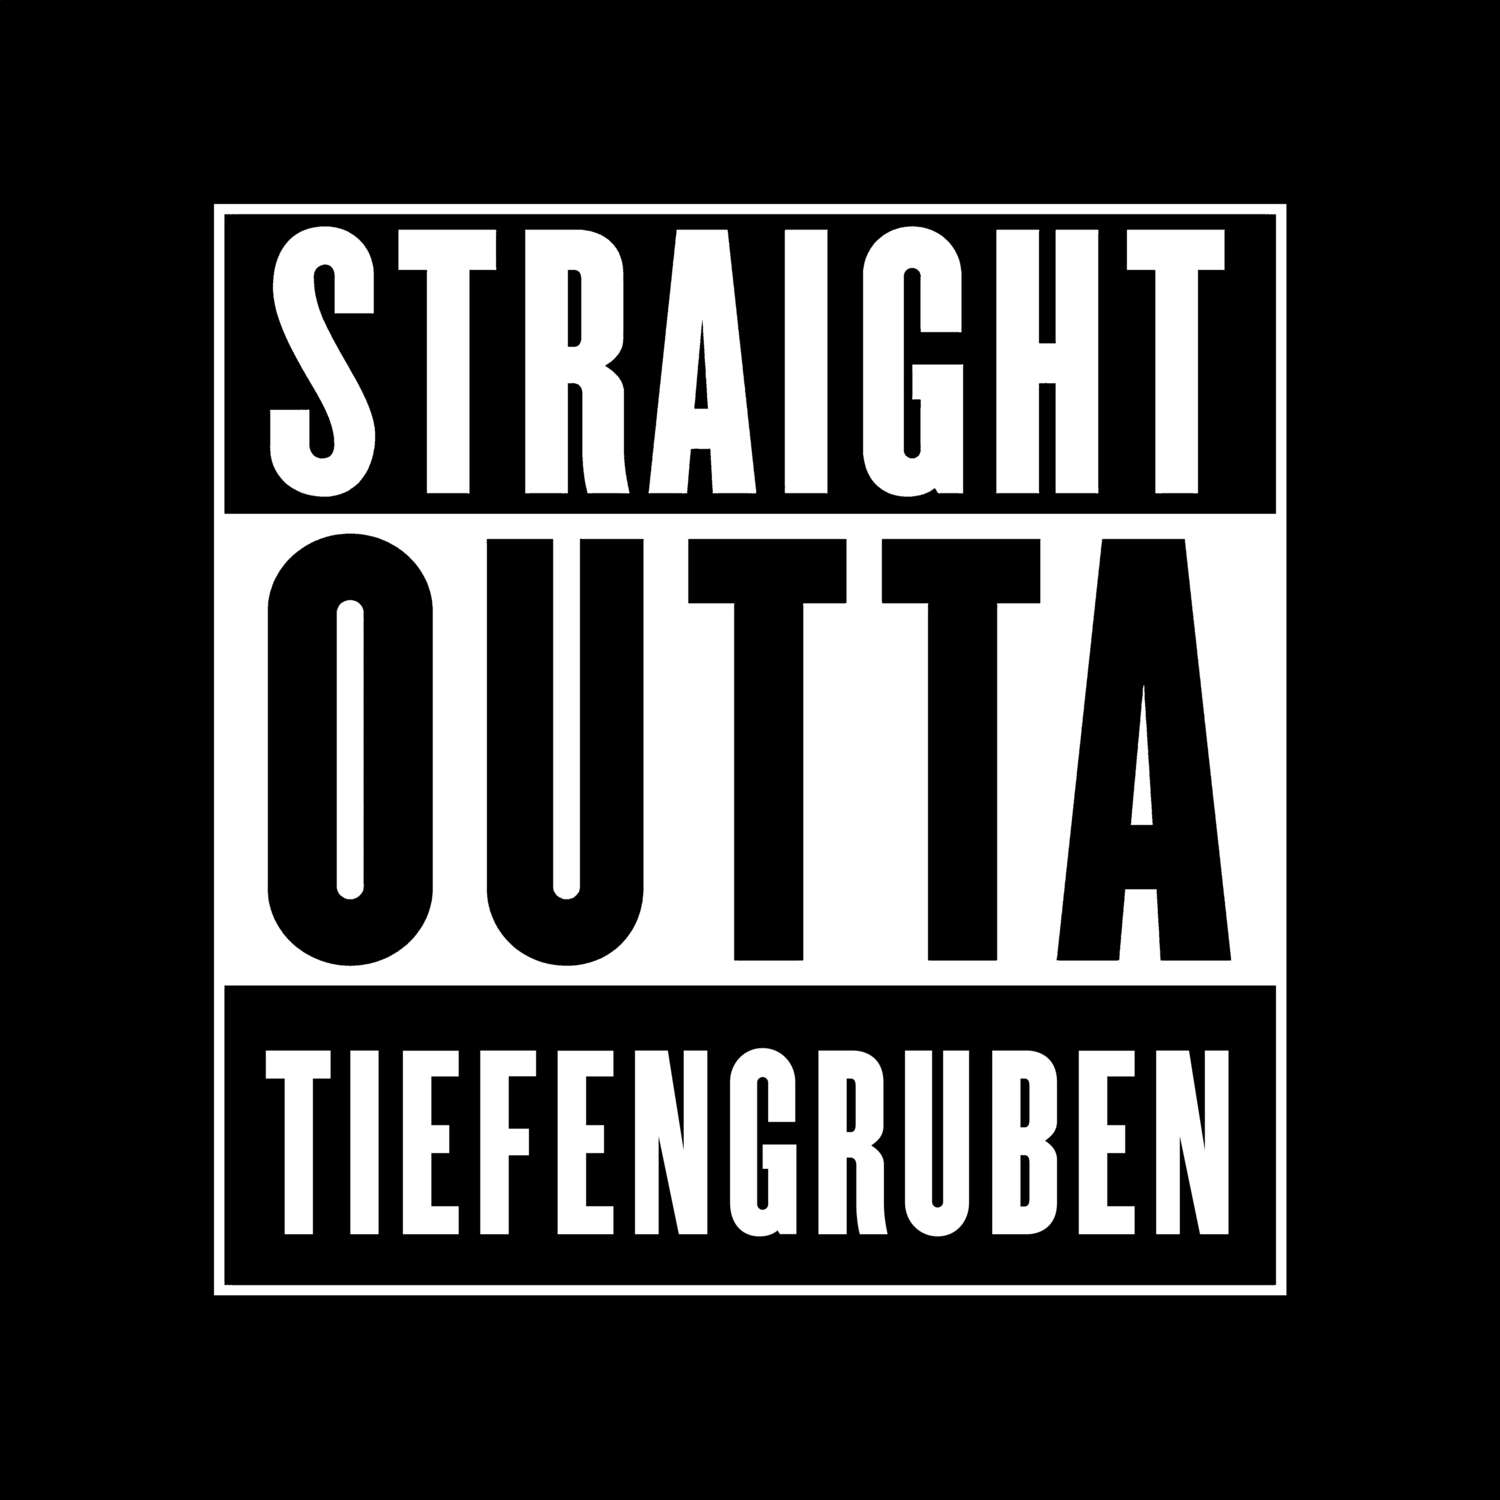 Tiefengruben T-Shirt »Straight Outta«